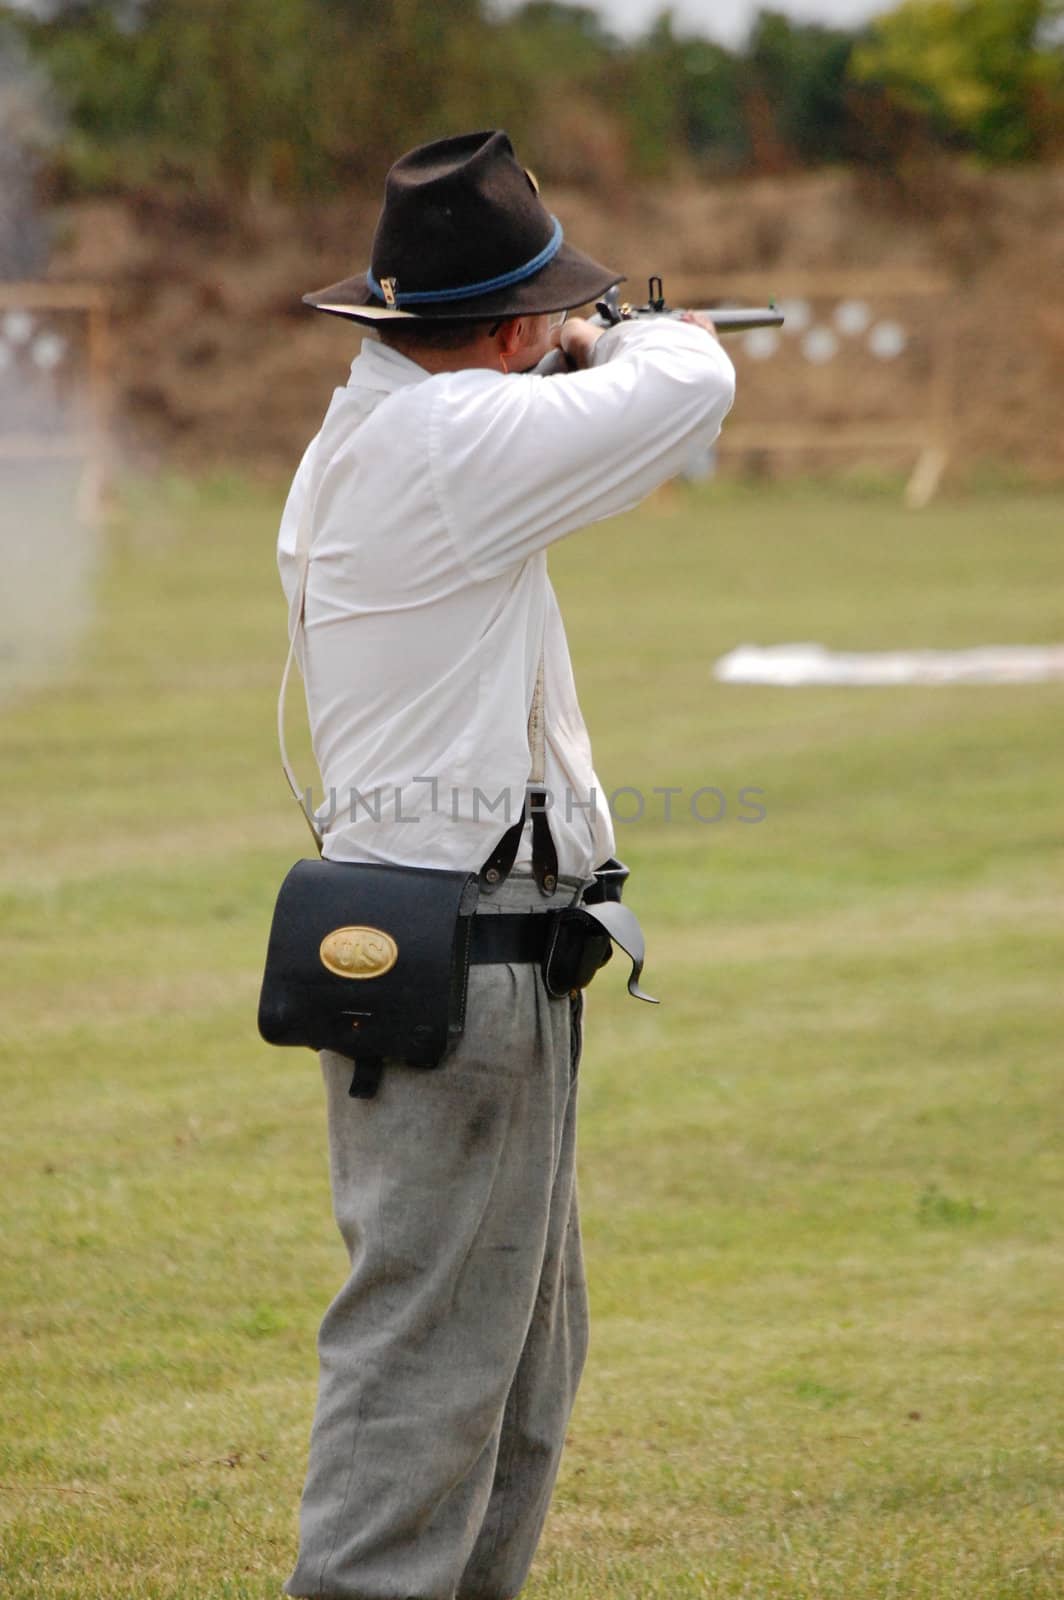 Man aims carbine by RefocusPhoto